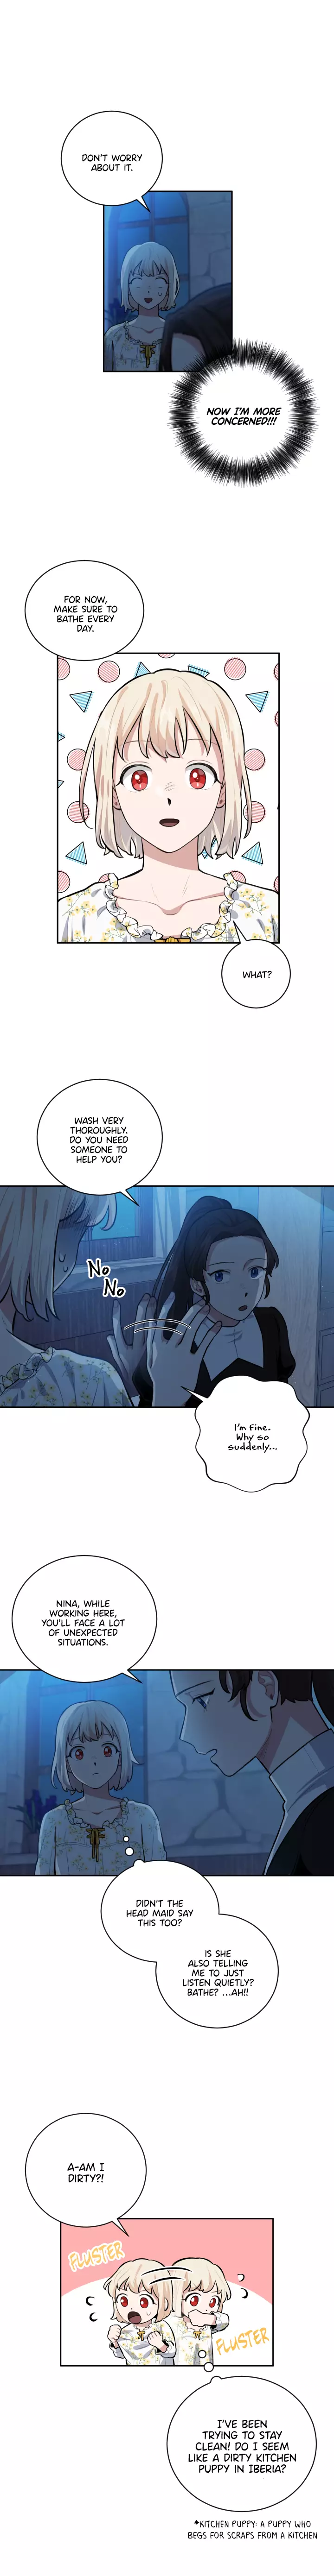 I Became A Maid In A Tl Novel - 13 page 6